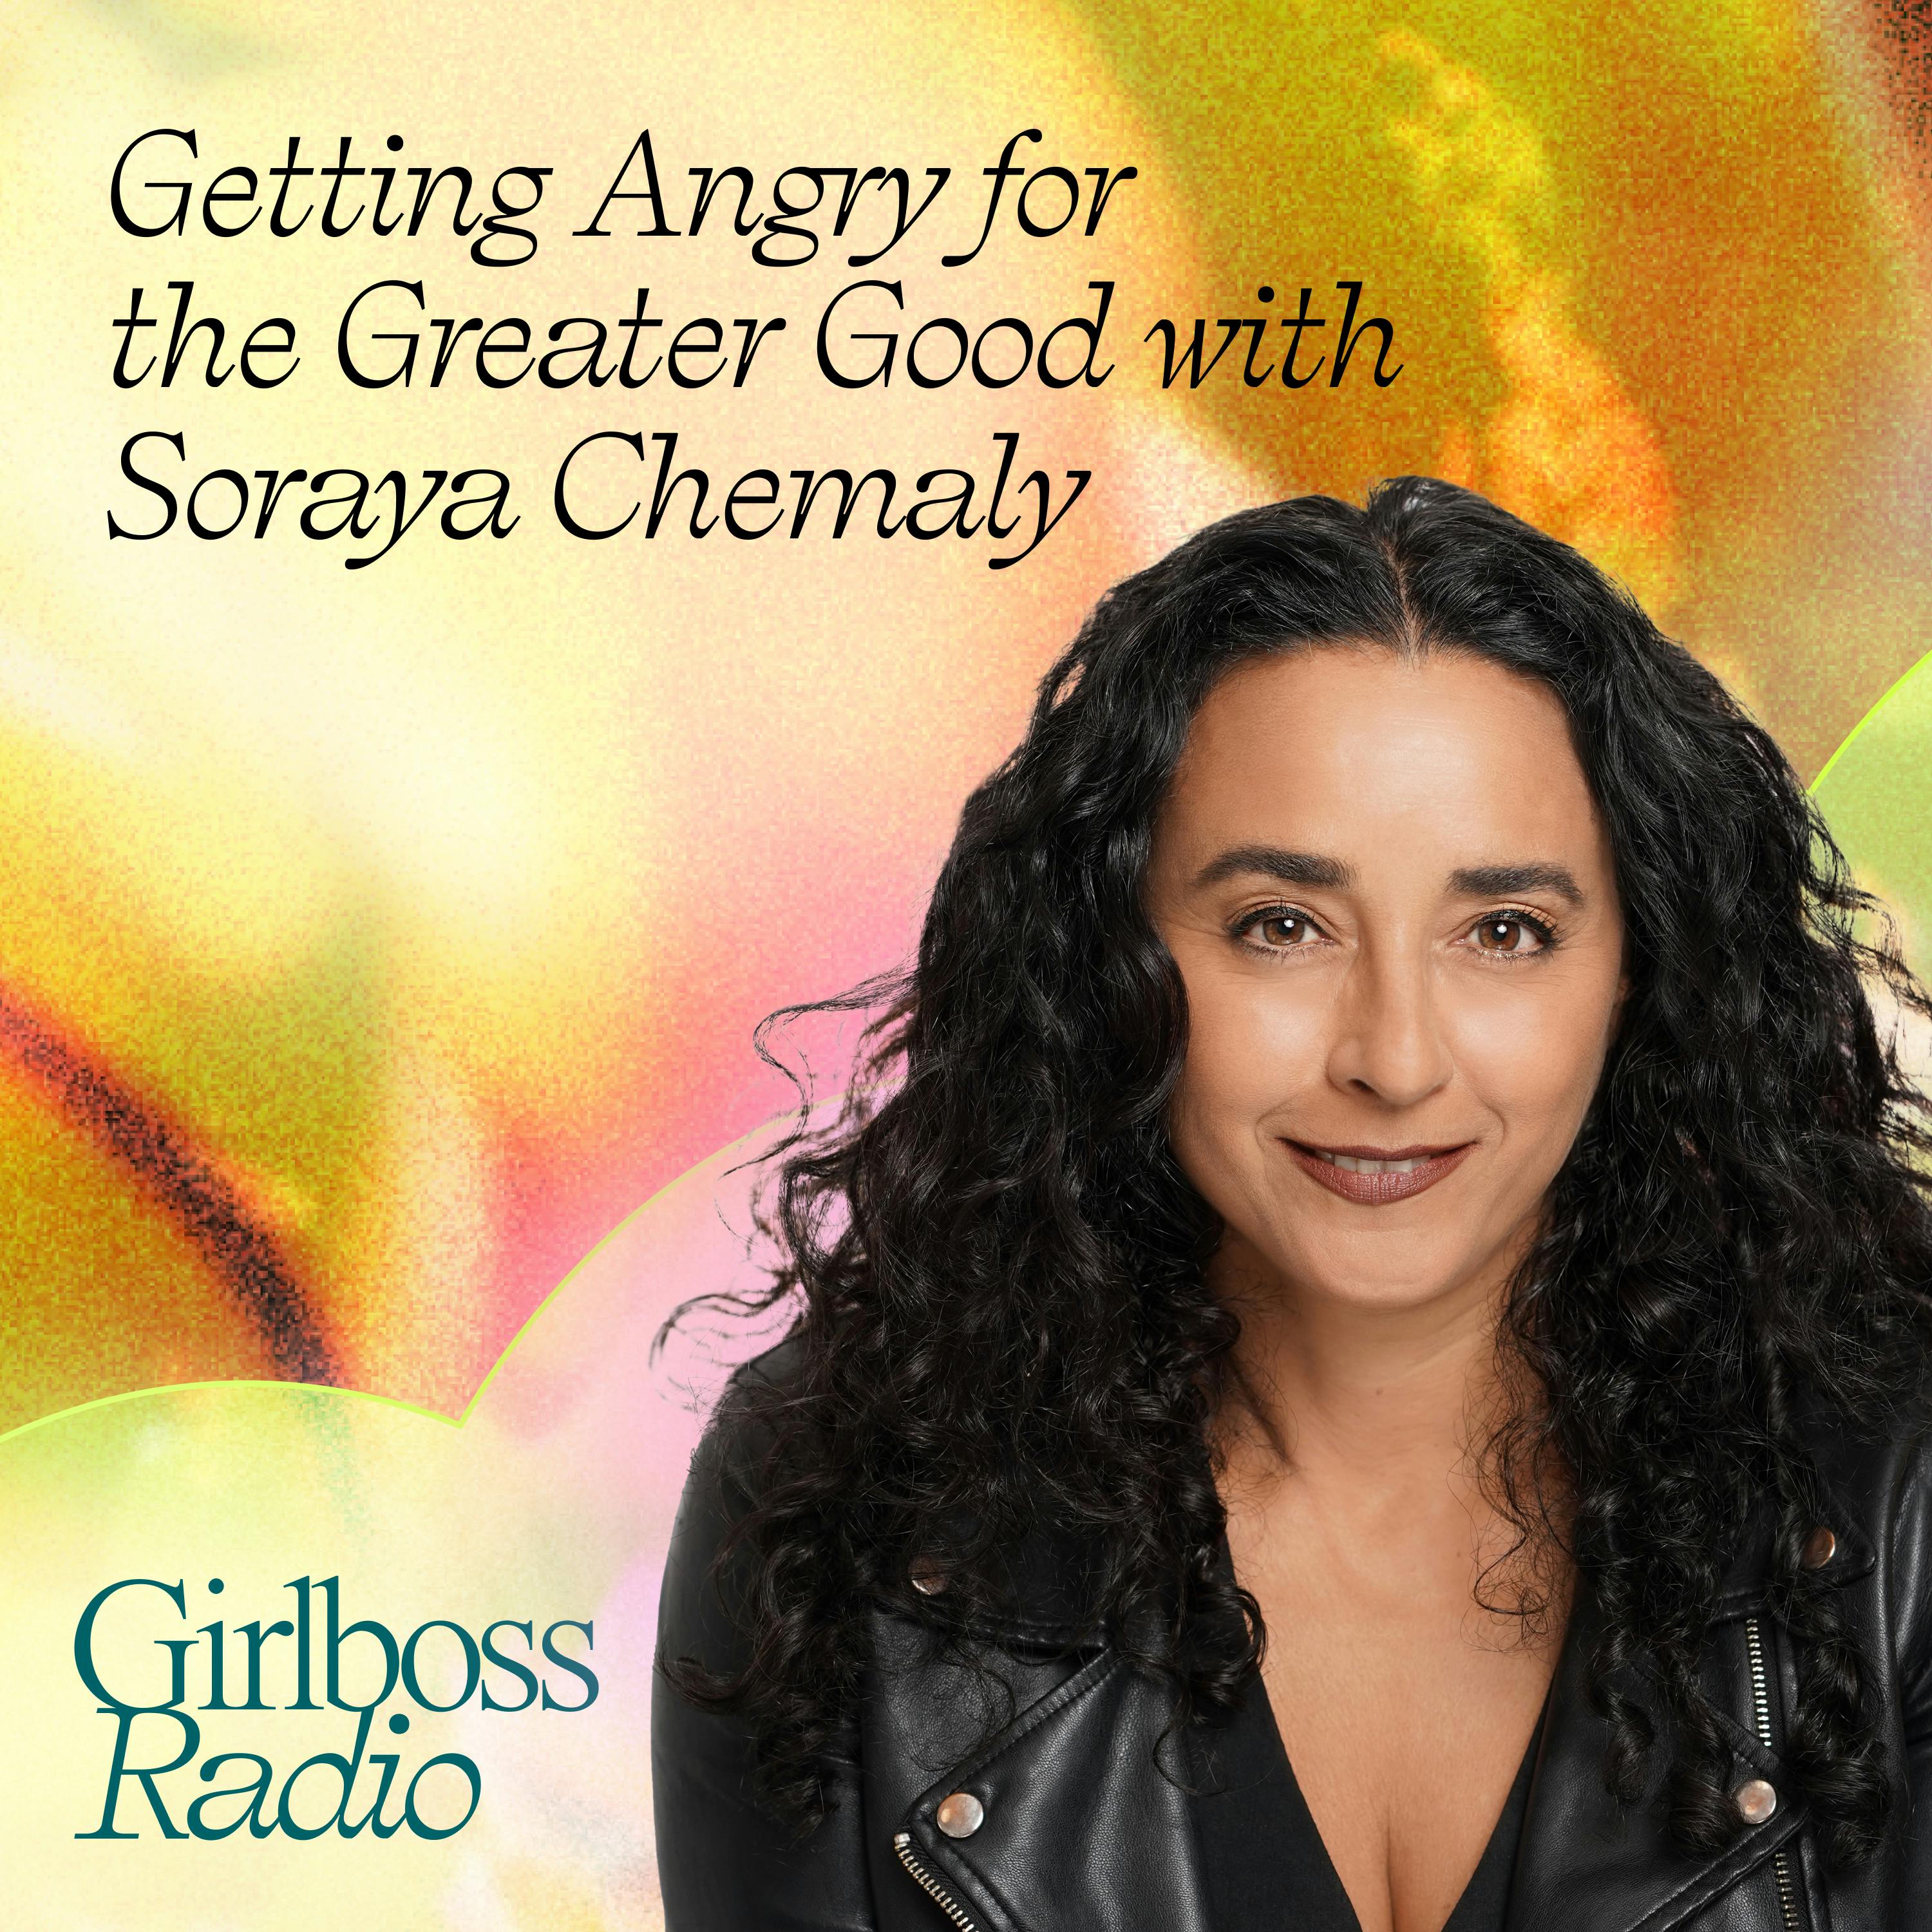 Getting Angry for the Greater Good with Soraya Chemaly